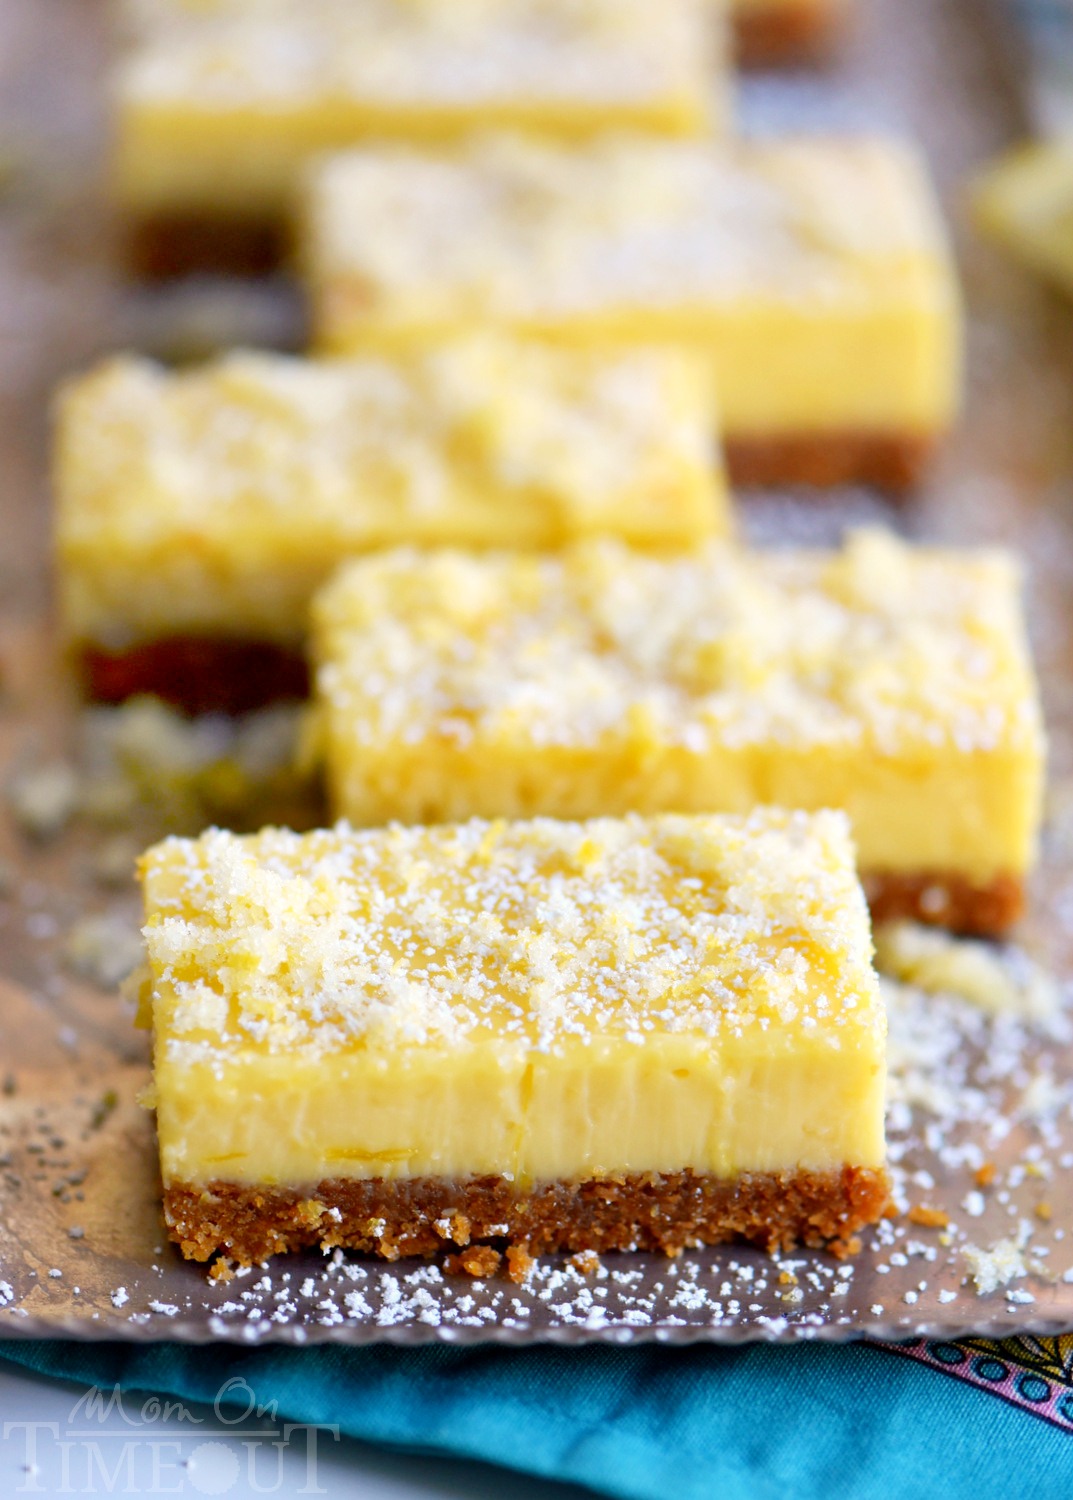 These Lemon Drop Bars are extra creamy and topped with candied lemon zest for the BIGGEST lemon flavor possible! So easy to make, deliciously sweet and tart, you'll find this treat hard to resist! // Mom On Timeout 